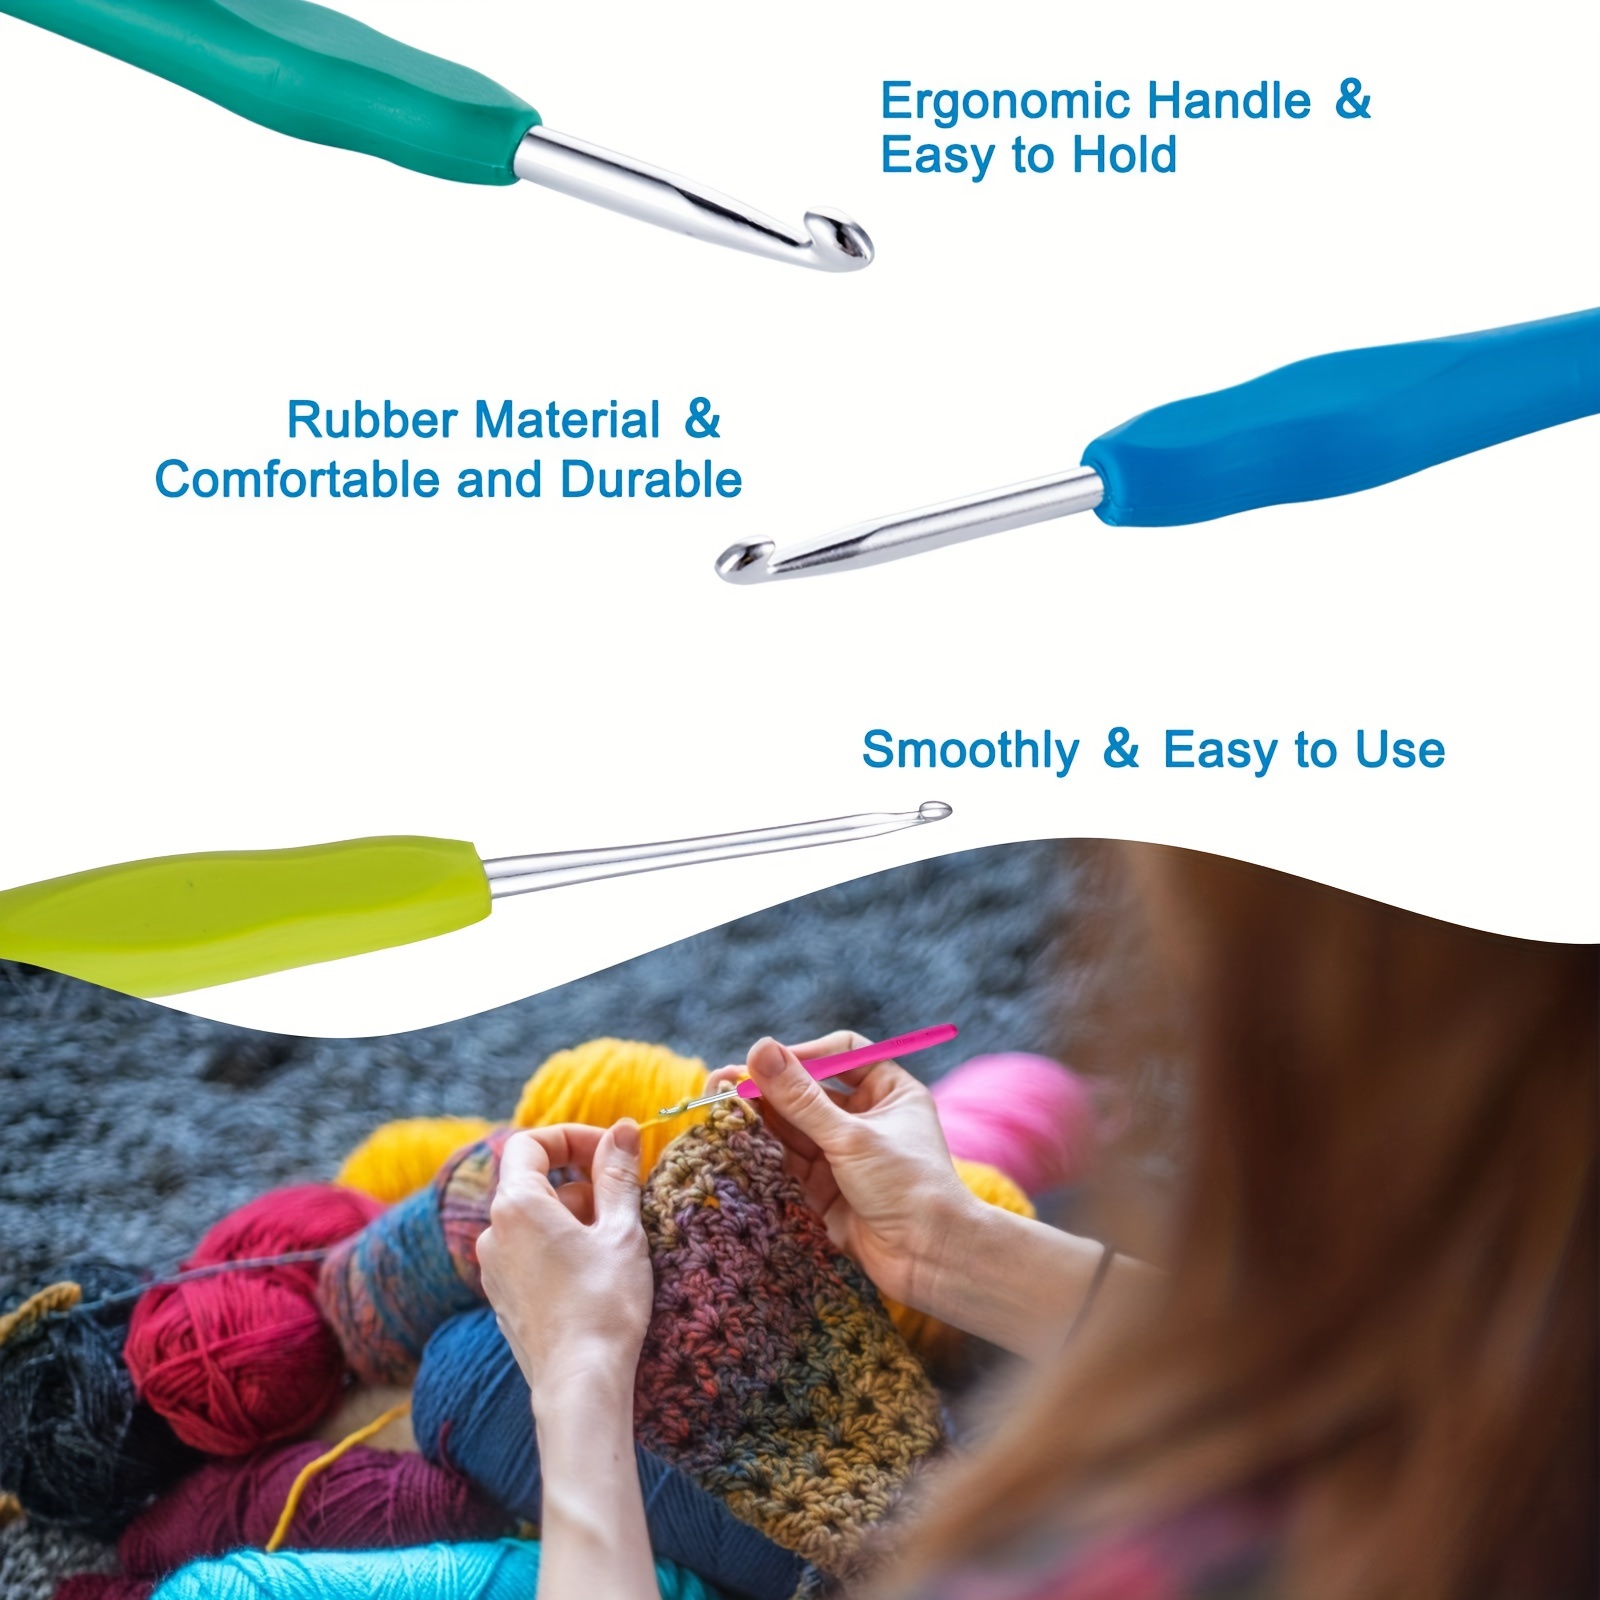 5mm Crochet Hook, Ergonomic Handle for Arthritic Hands, Soft Rubber Grip  Extra Long Knitting Needles for Beginners and Knitting Crocheting Yarn (5mm)  5.0mm